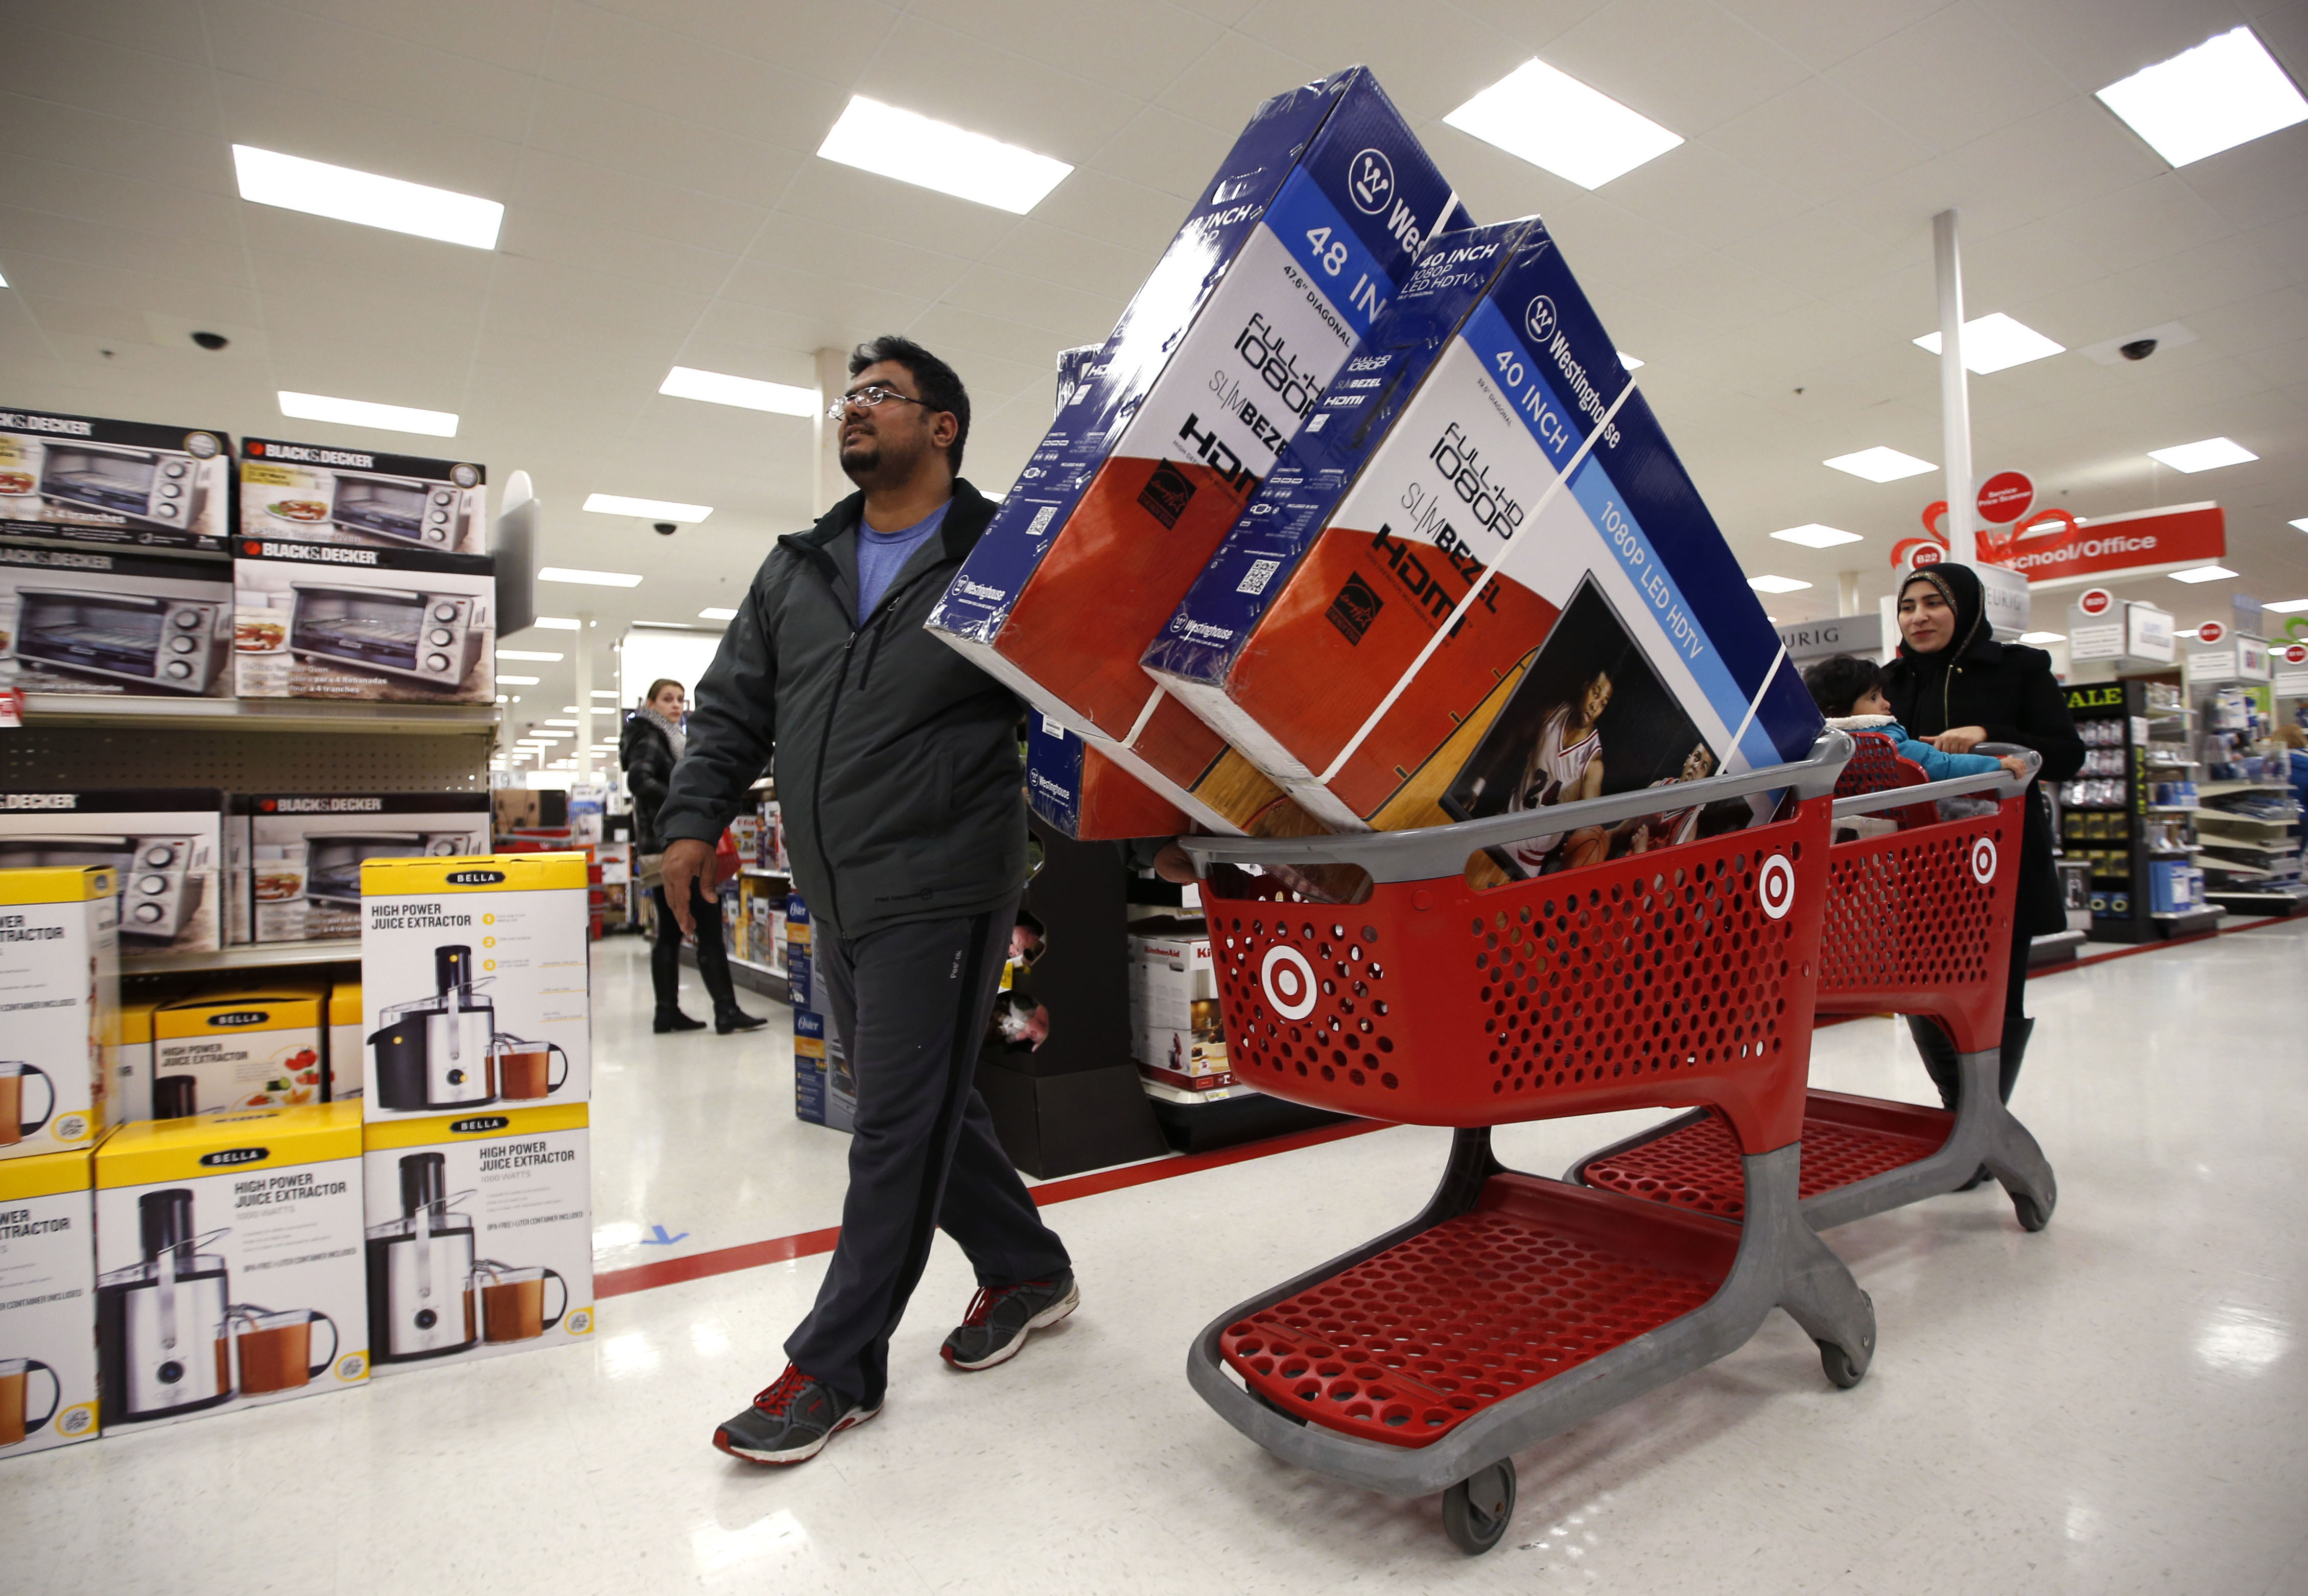 Black Friday Originally Had Dark Meaning – All About America - What Stores Are Open Black Friday On Midnight